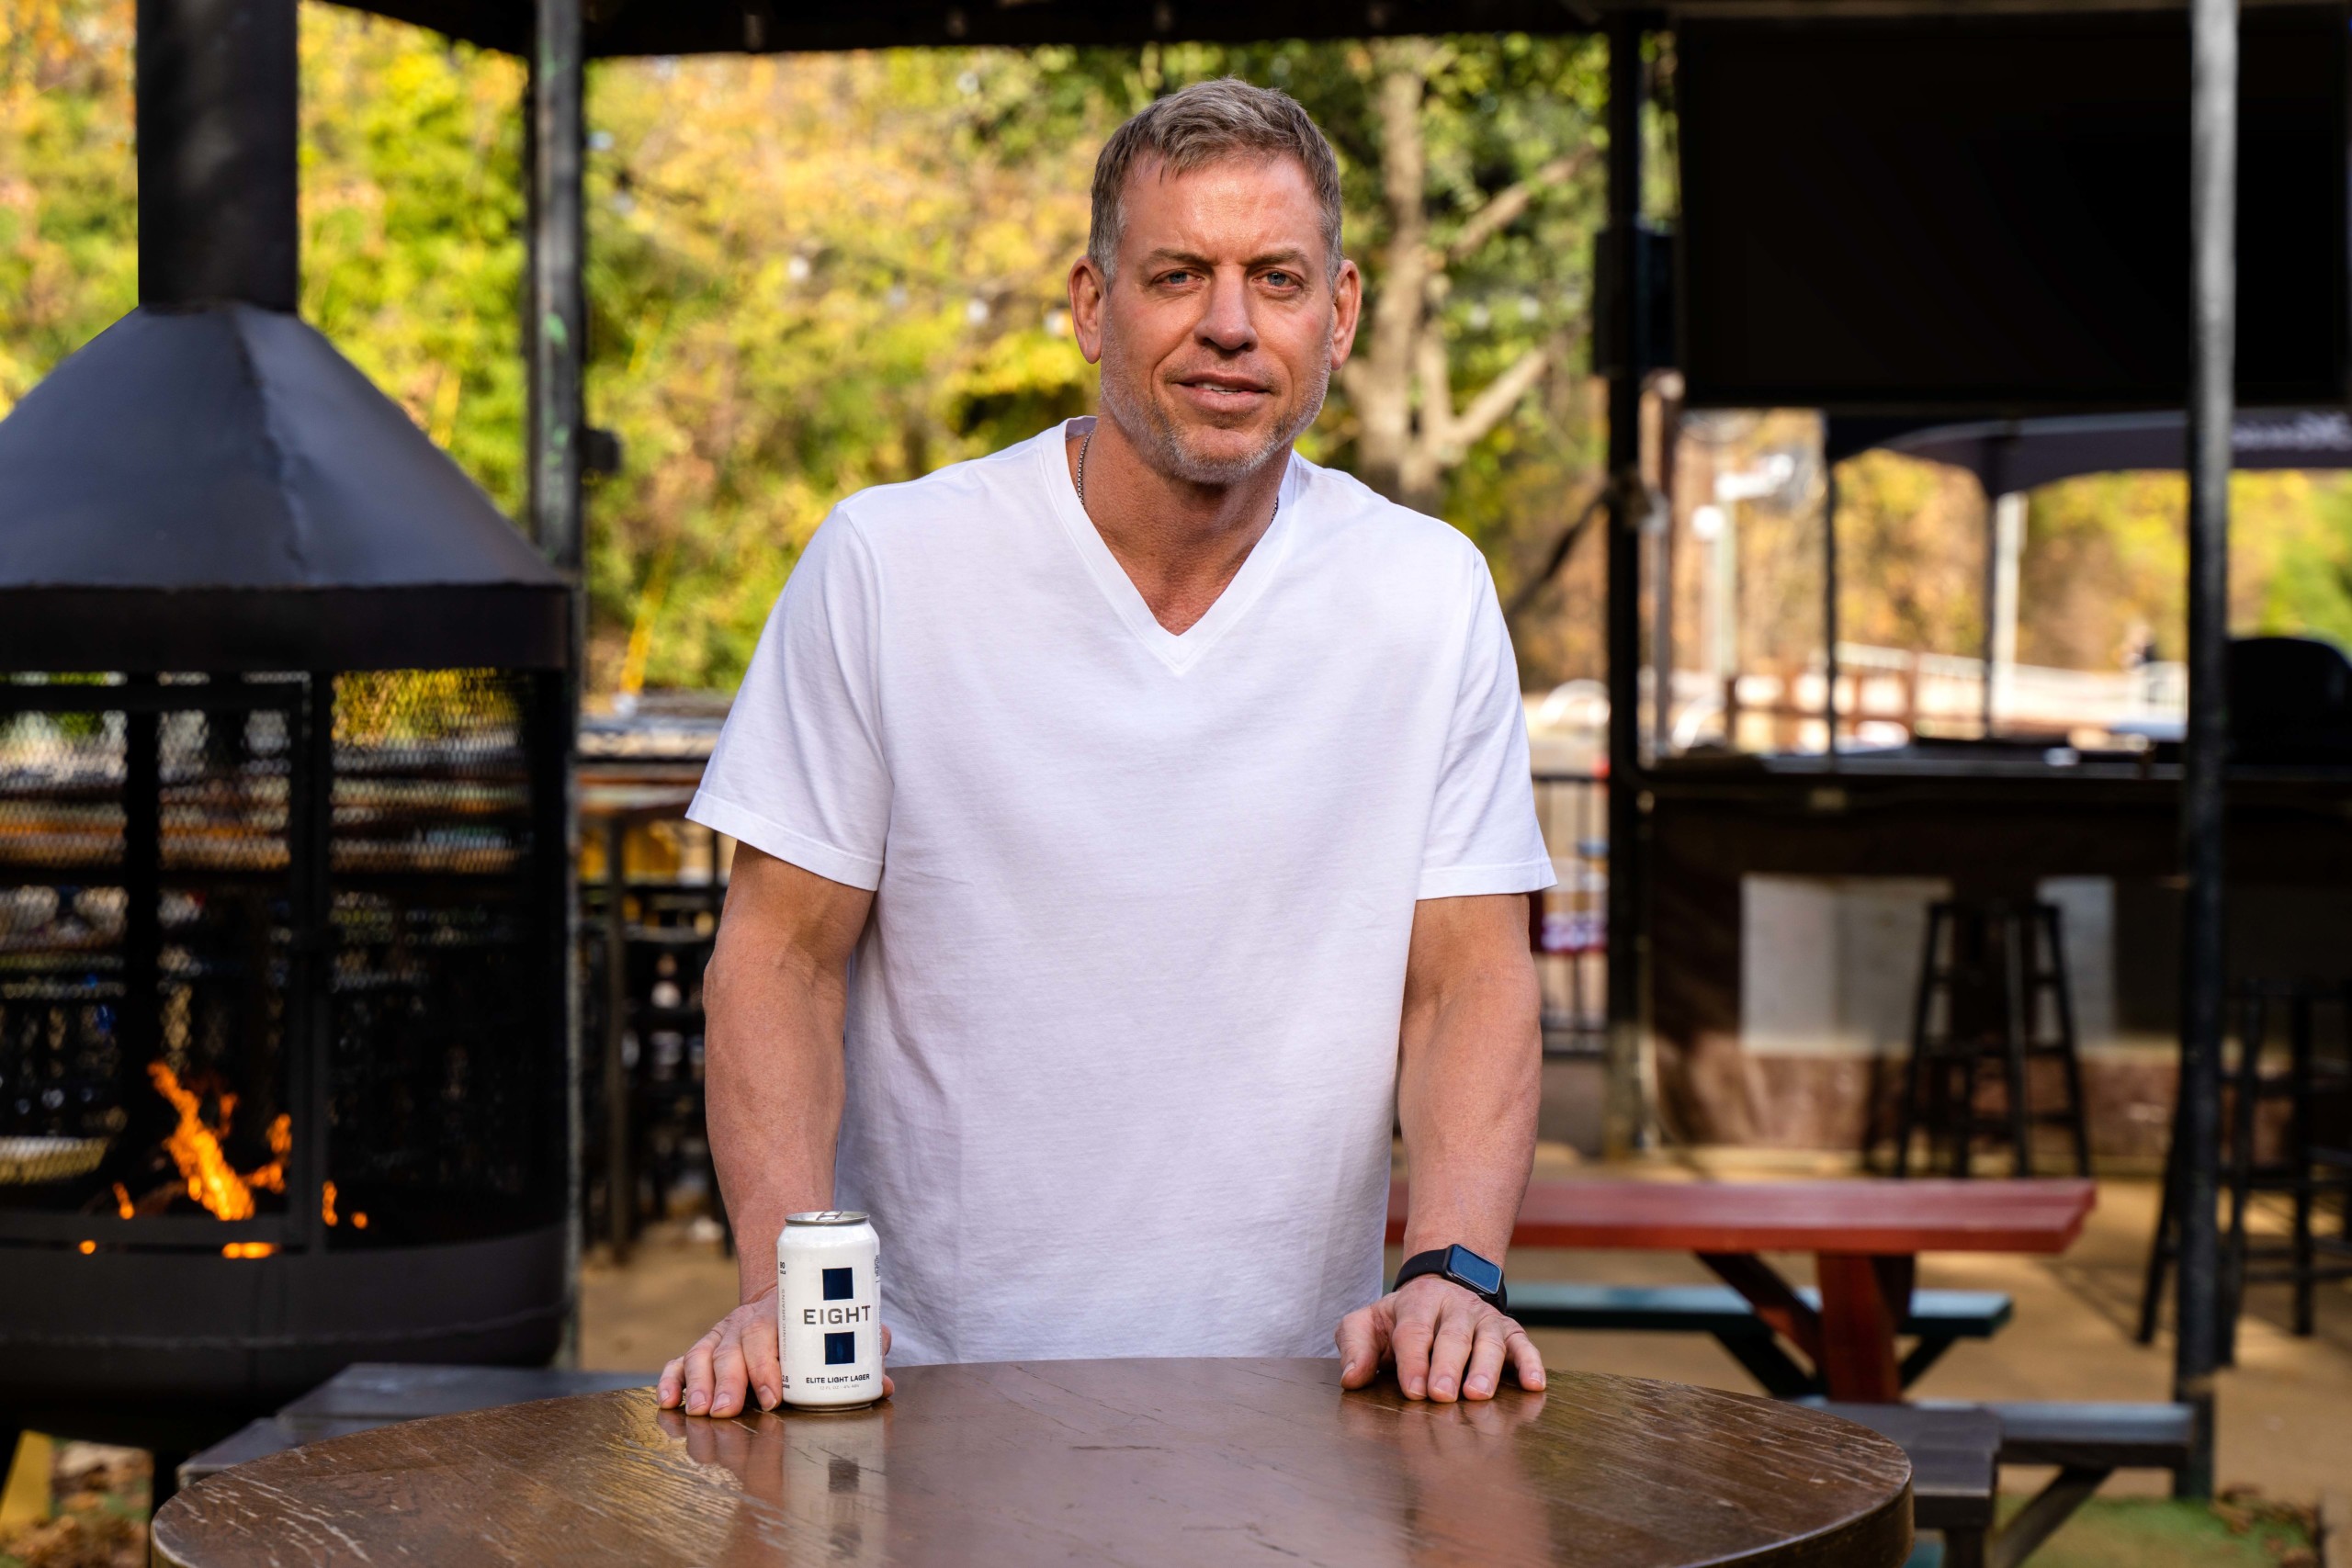 NFL's Troy Aikman: Advice For The Business Athlete